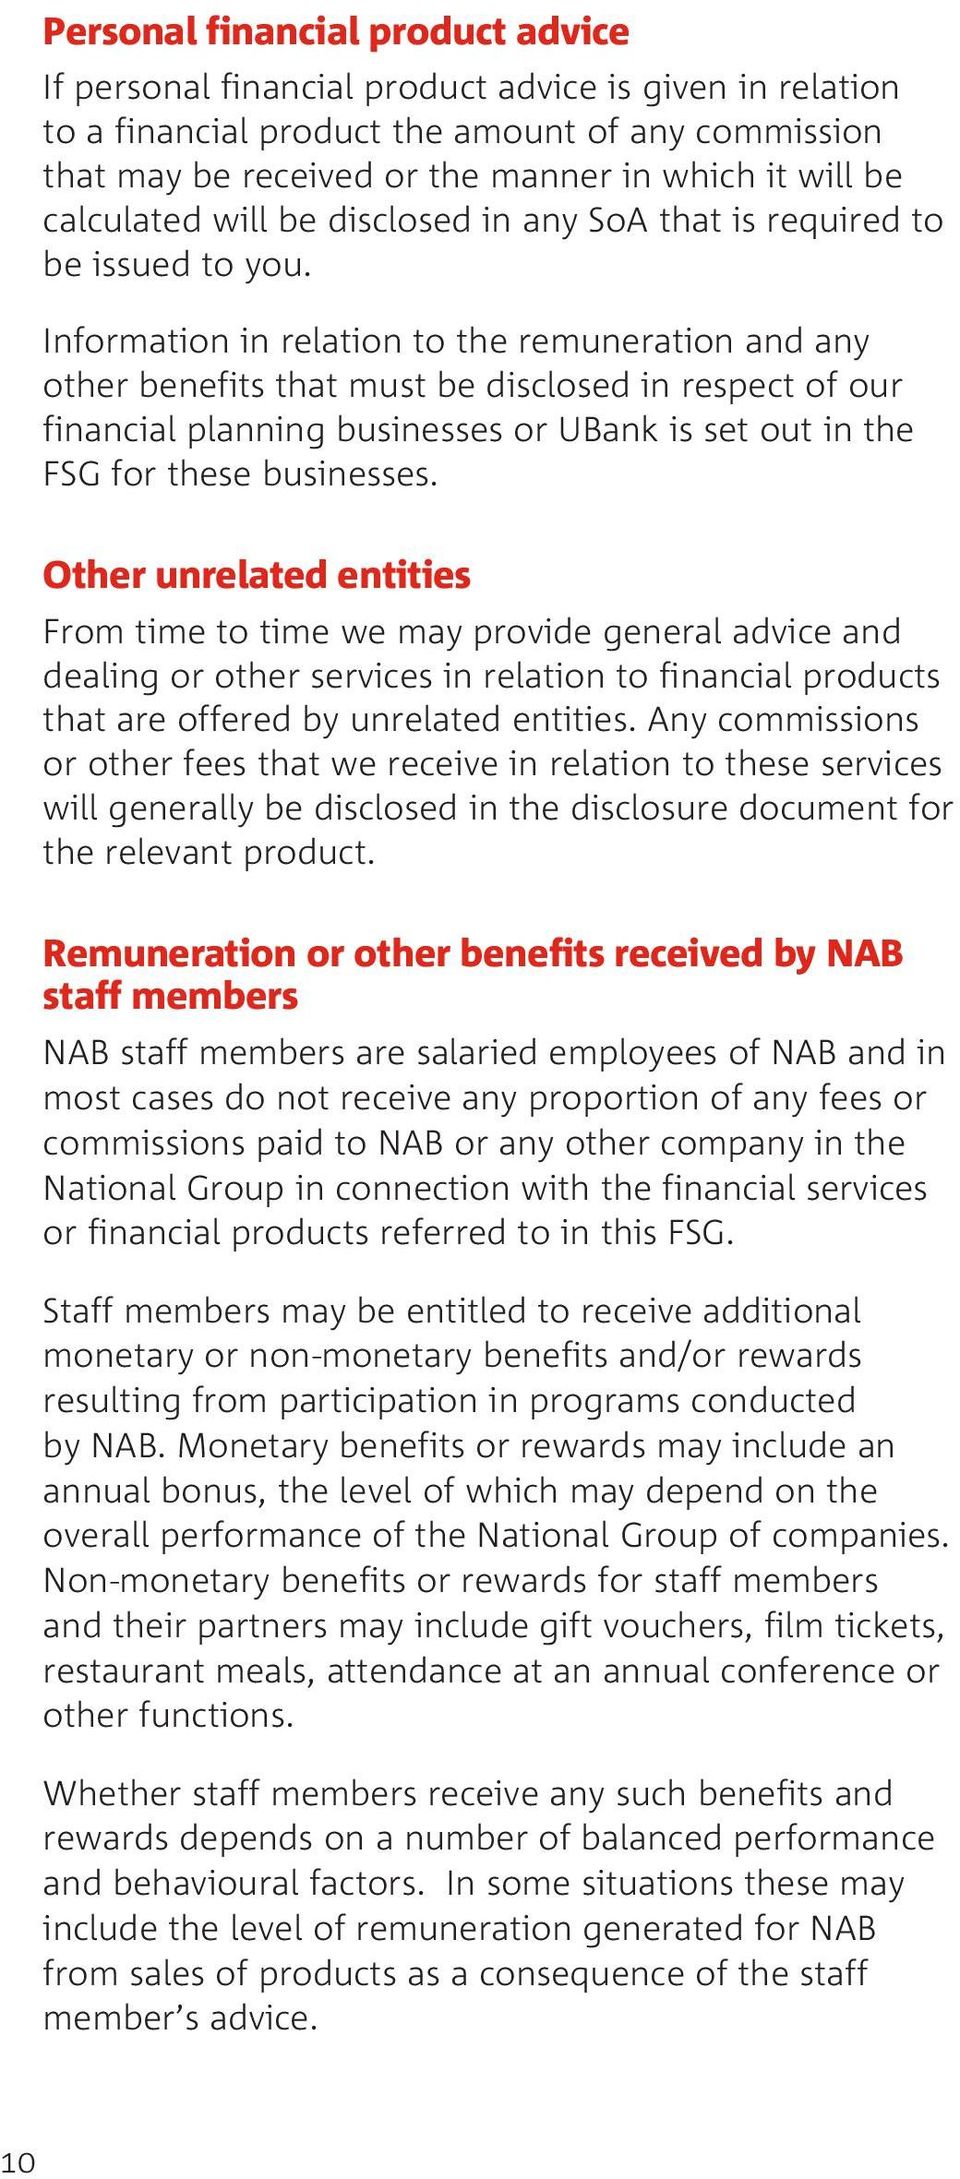 Information in relation to the remuneration and any other benefits that must be disclosed in respect of our financial planning businesses or UBank is set out in the FSG for these businesses.